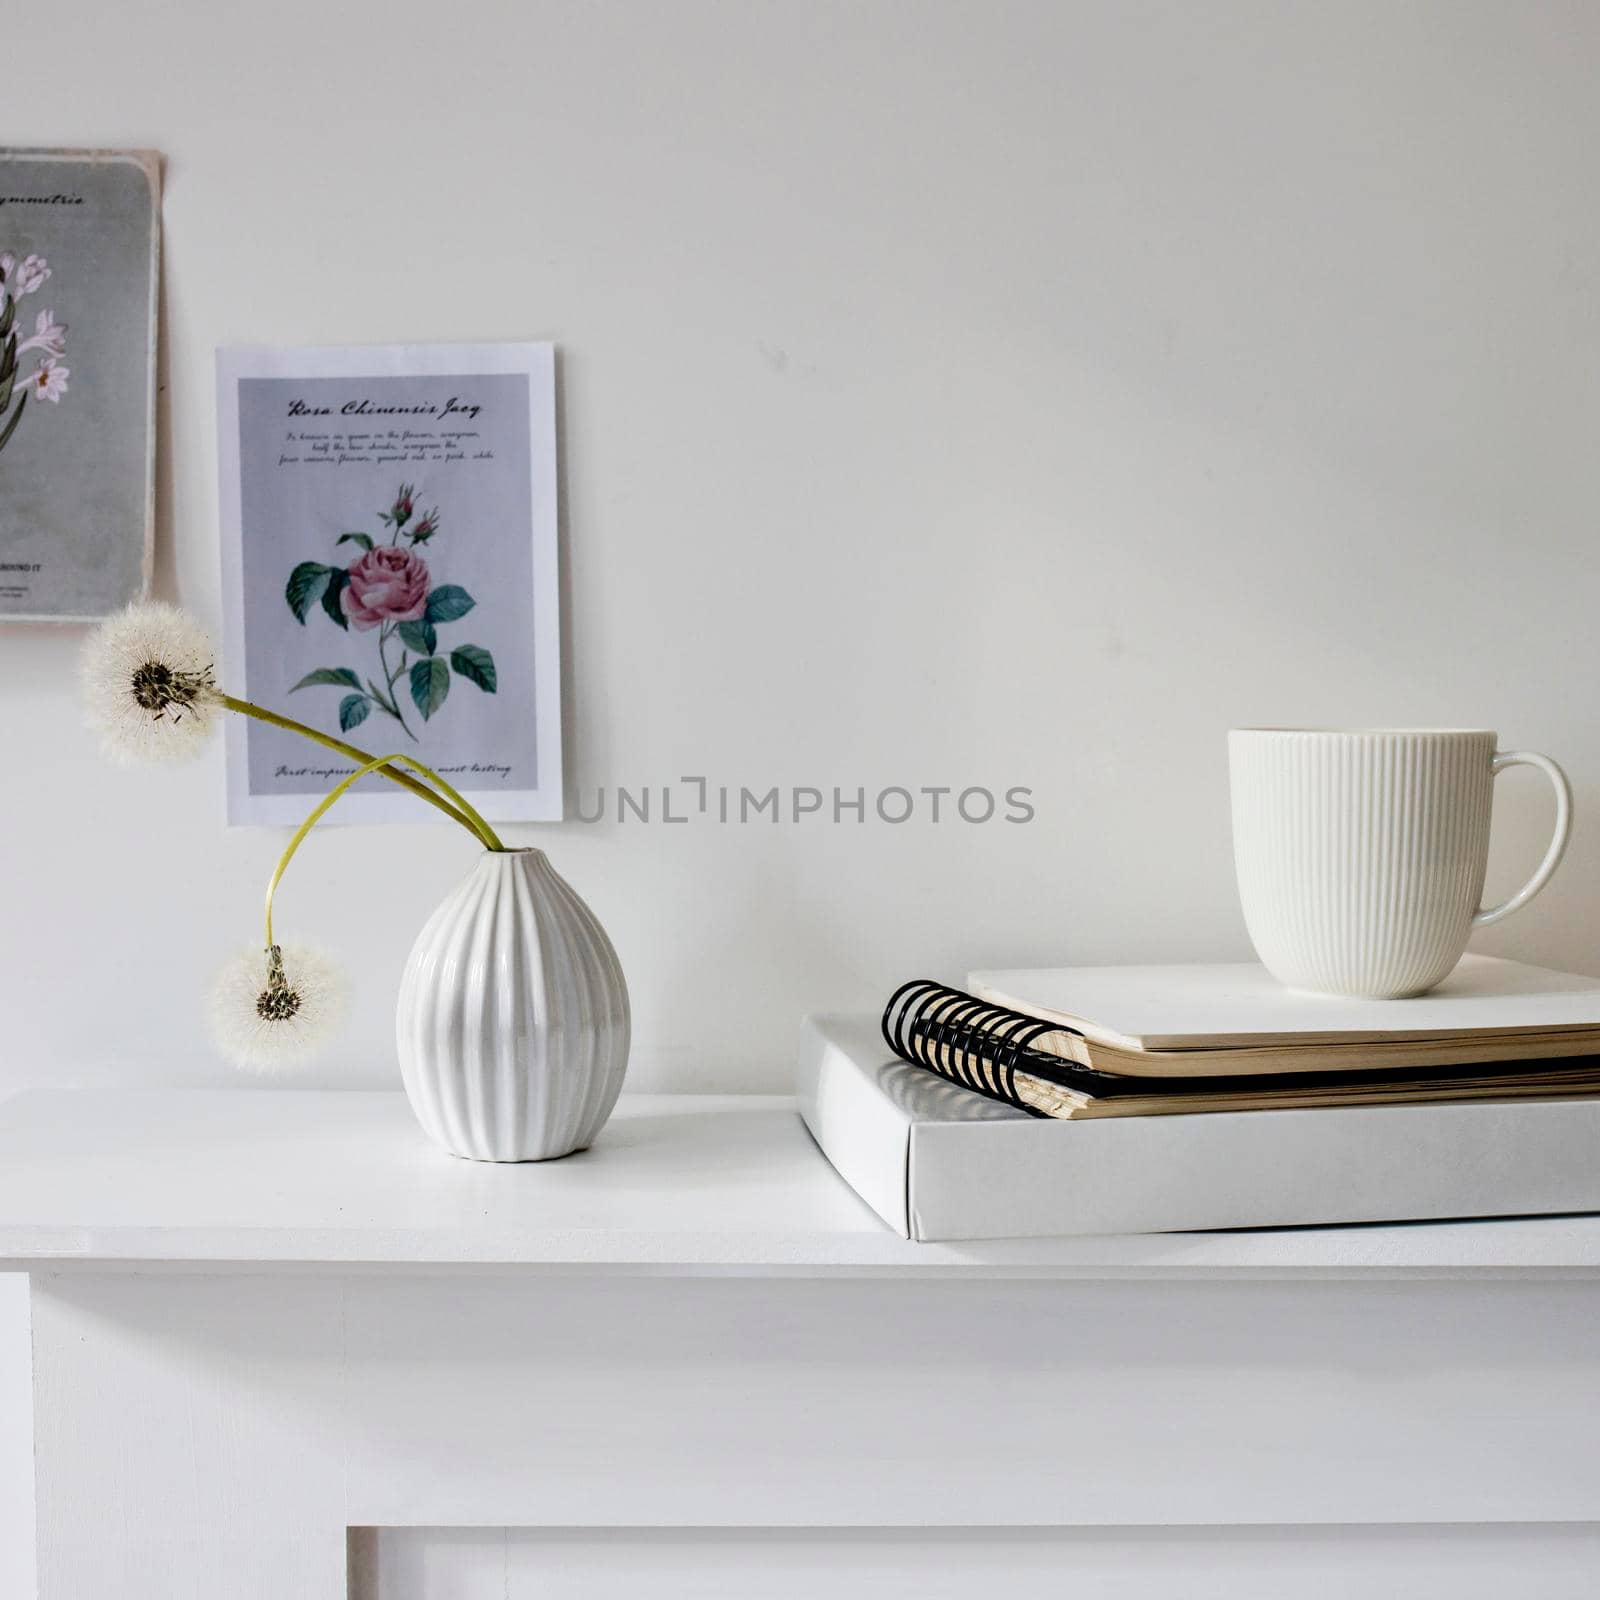 A seventies-style fluted vase with two fluffy dandelions is on the dresser. A small picture with a flower in pastel colors on the wall. A white cup of tea stands on spring-loaded notebooks. by elenarostunova